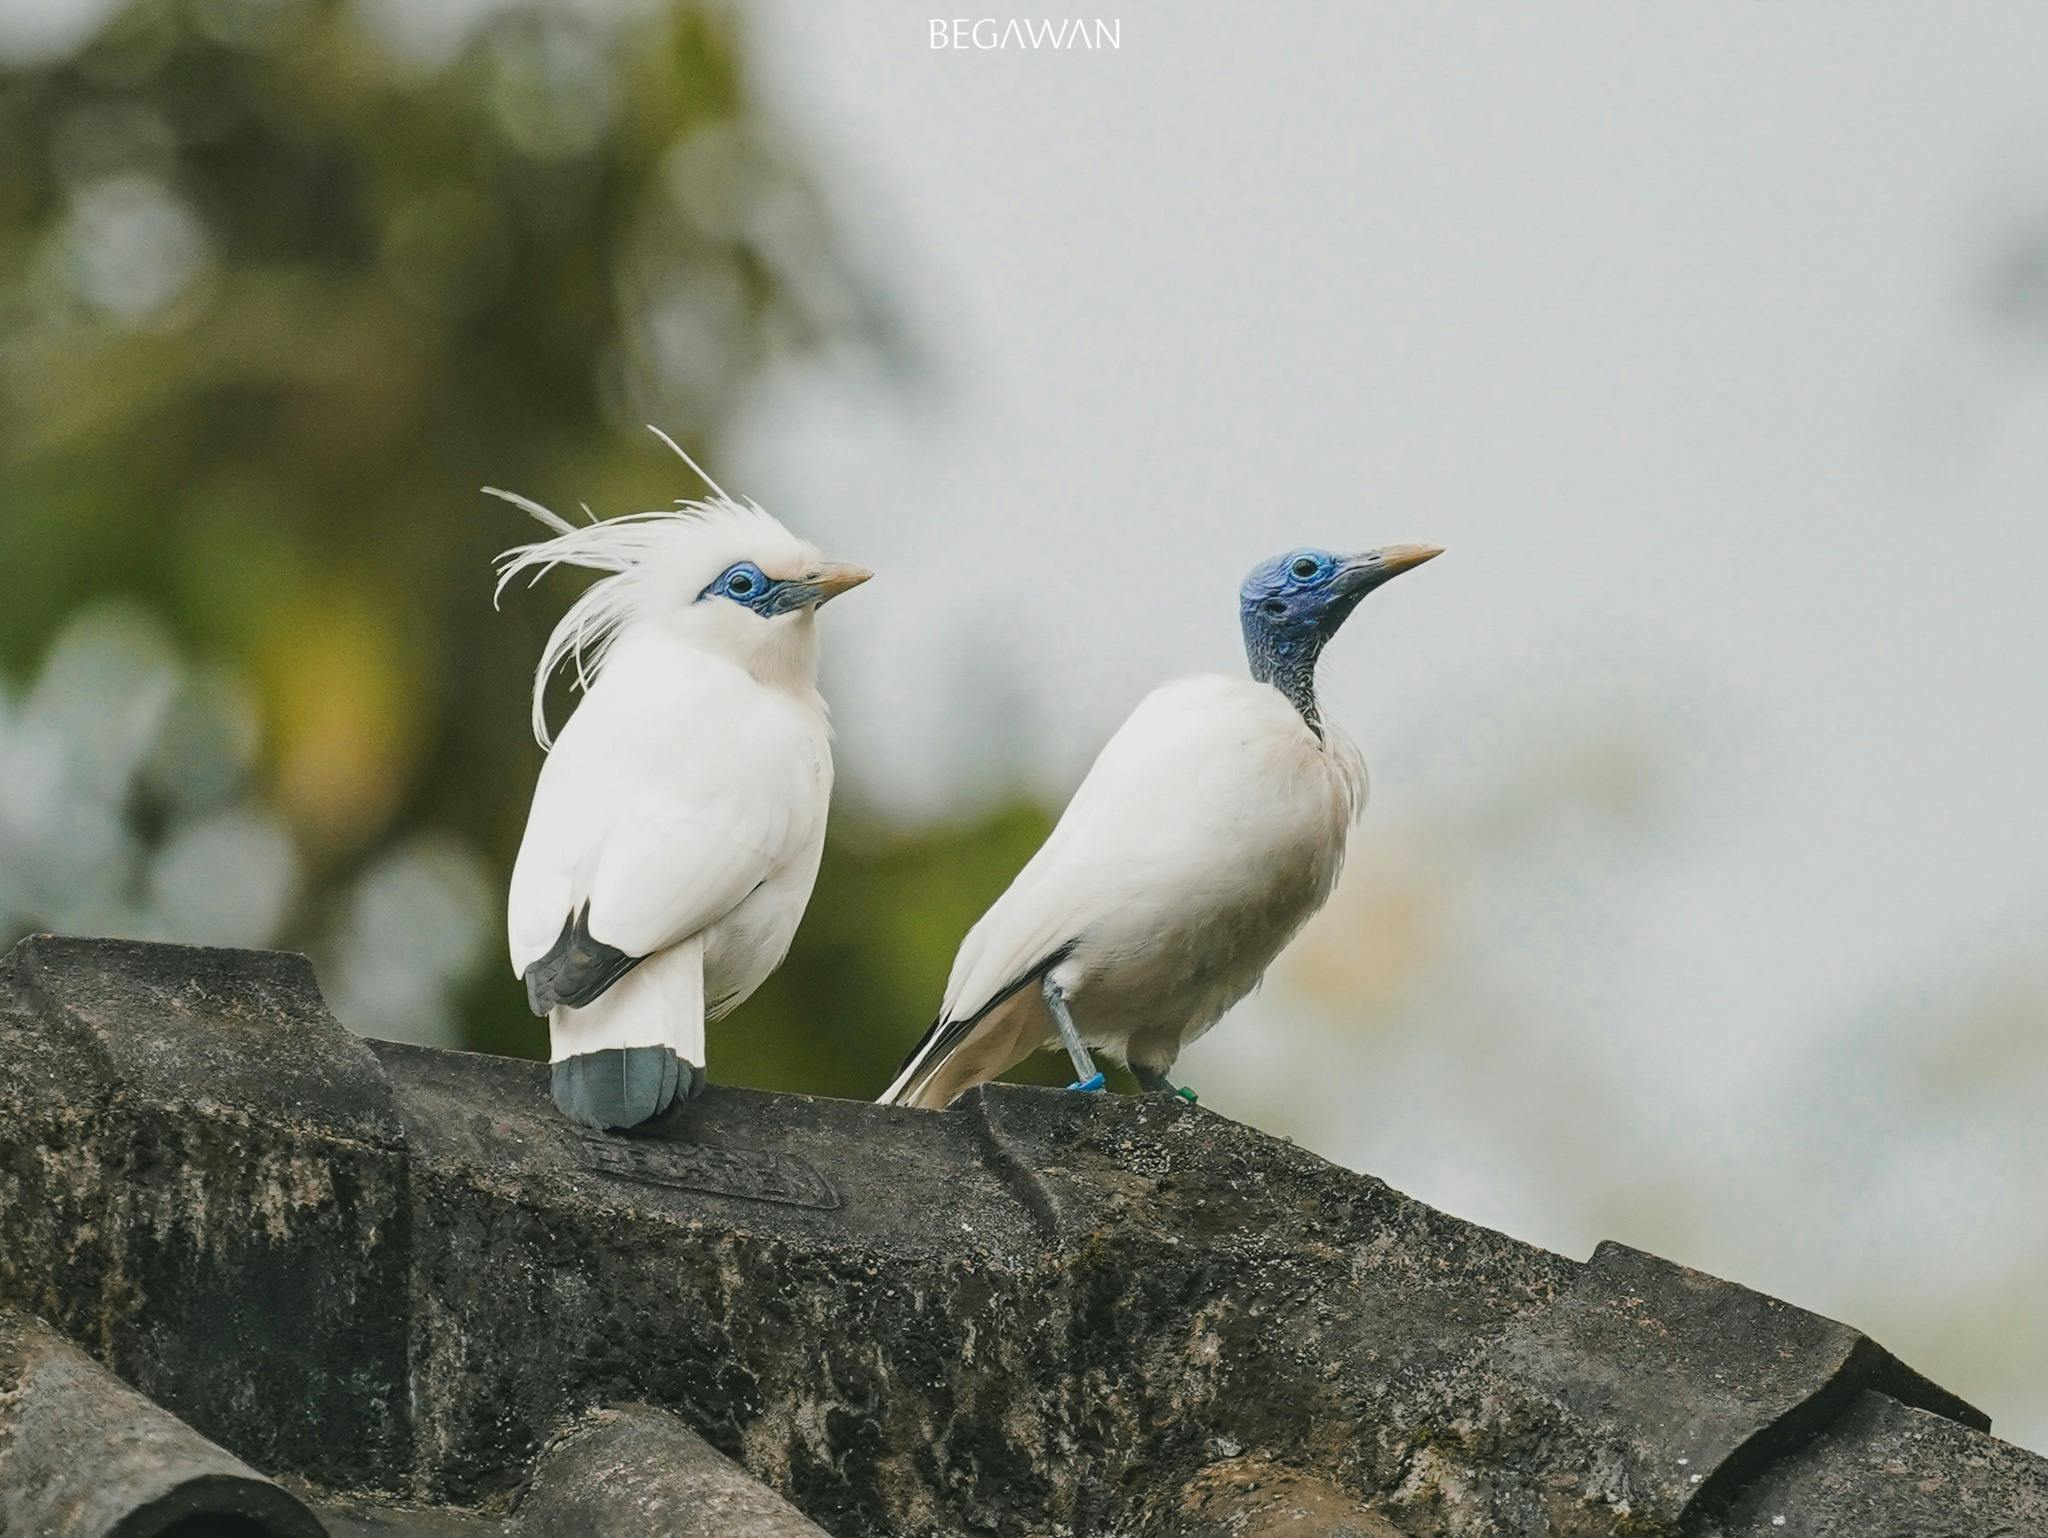 The Bali Starling, one of the rarest birds in the world and critically endangered